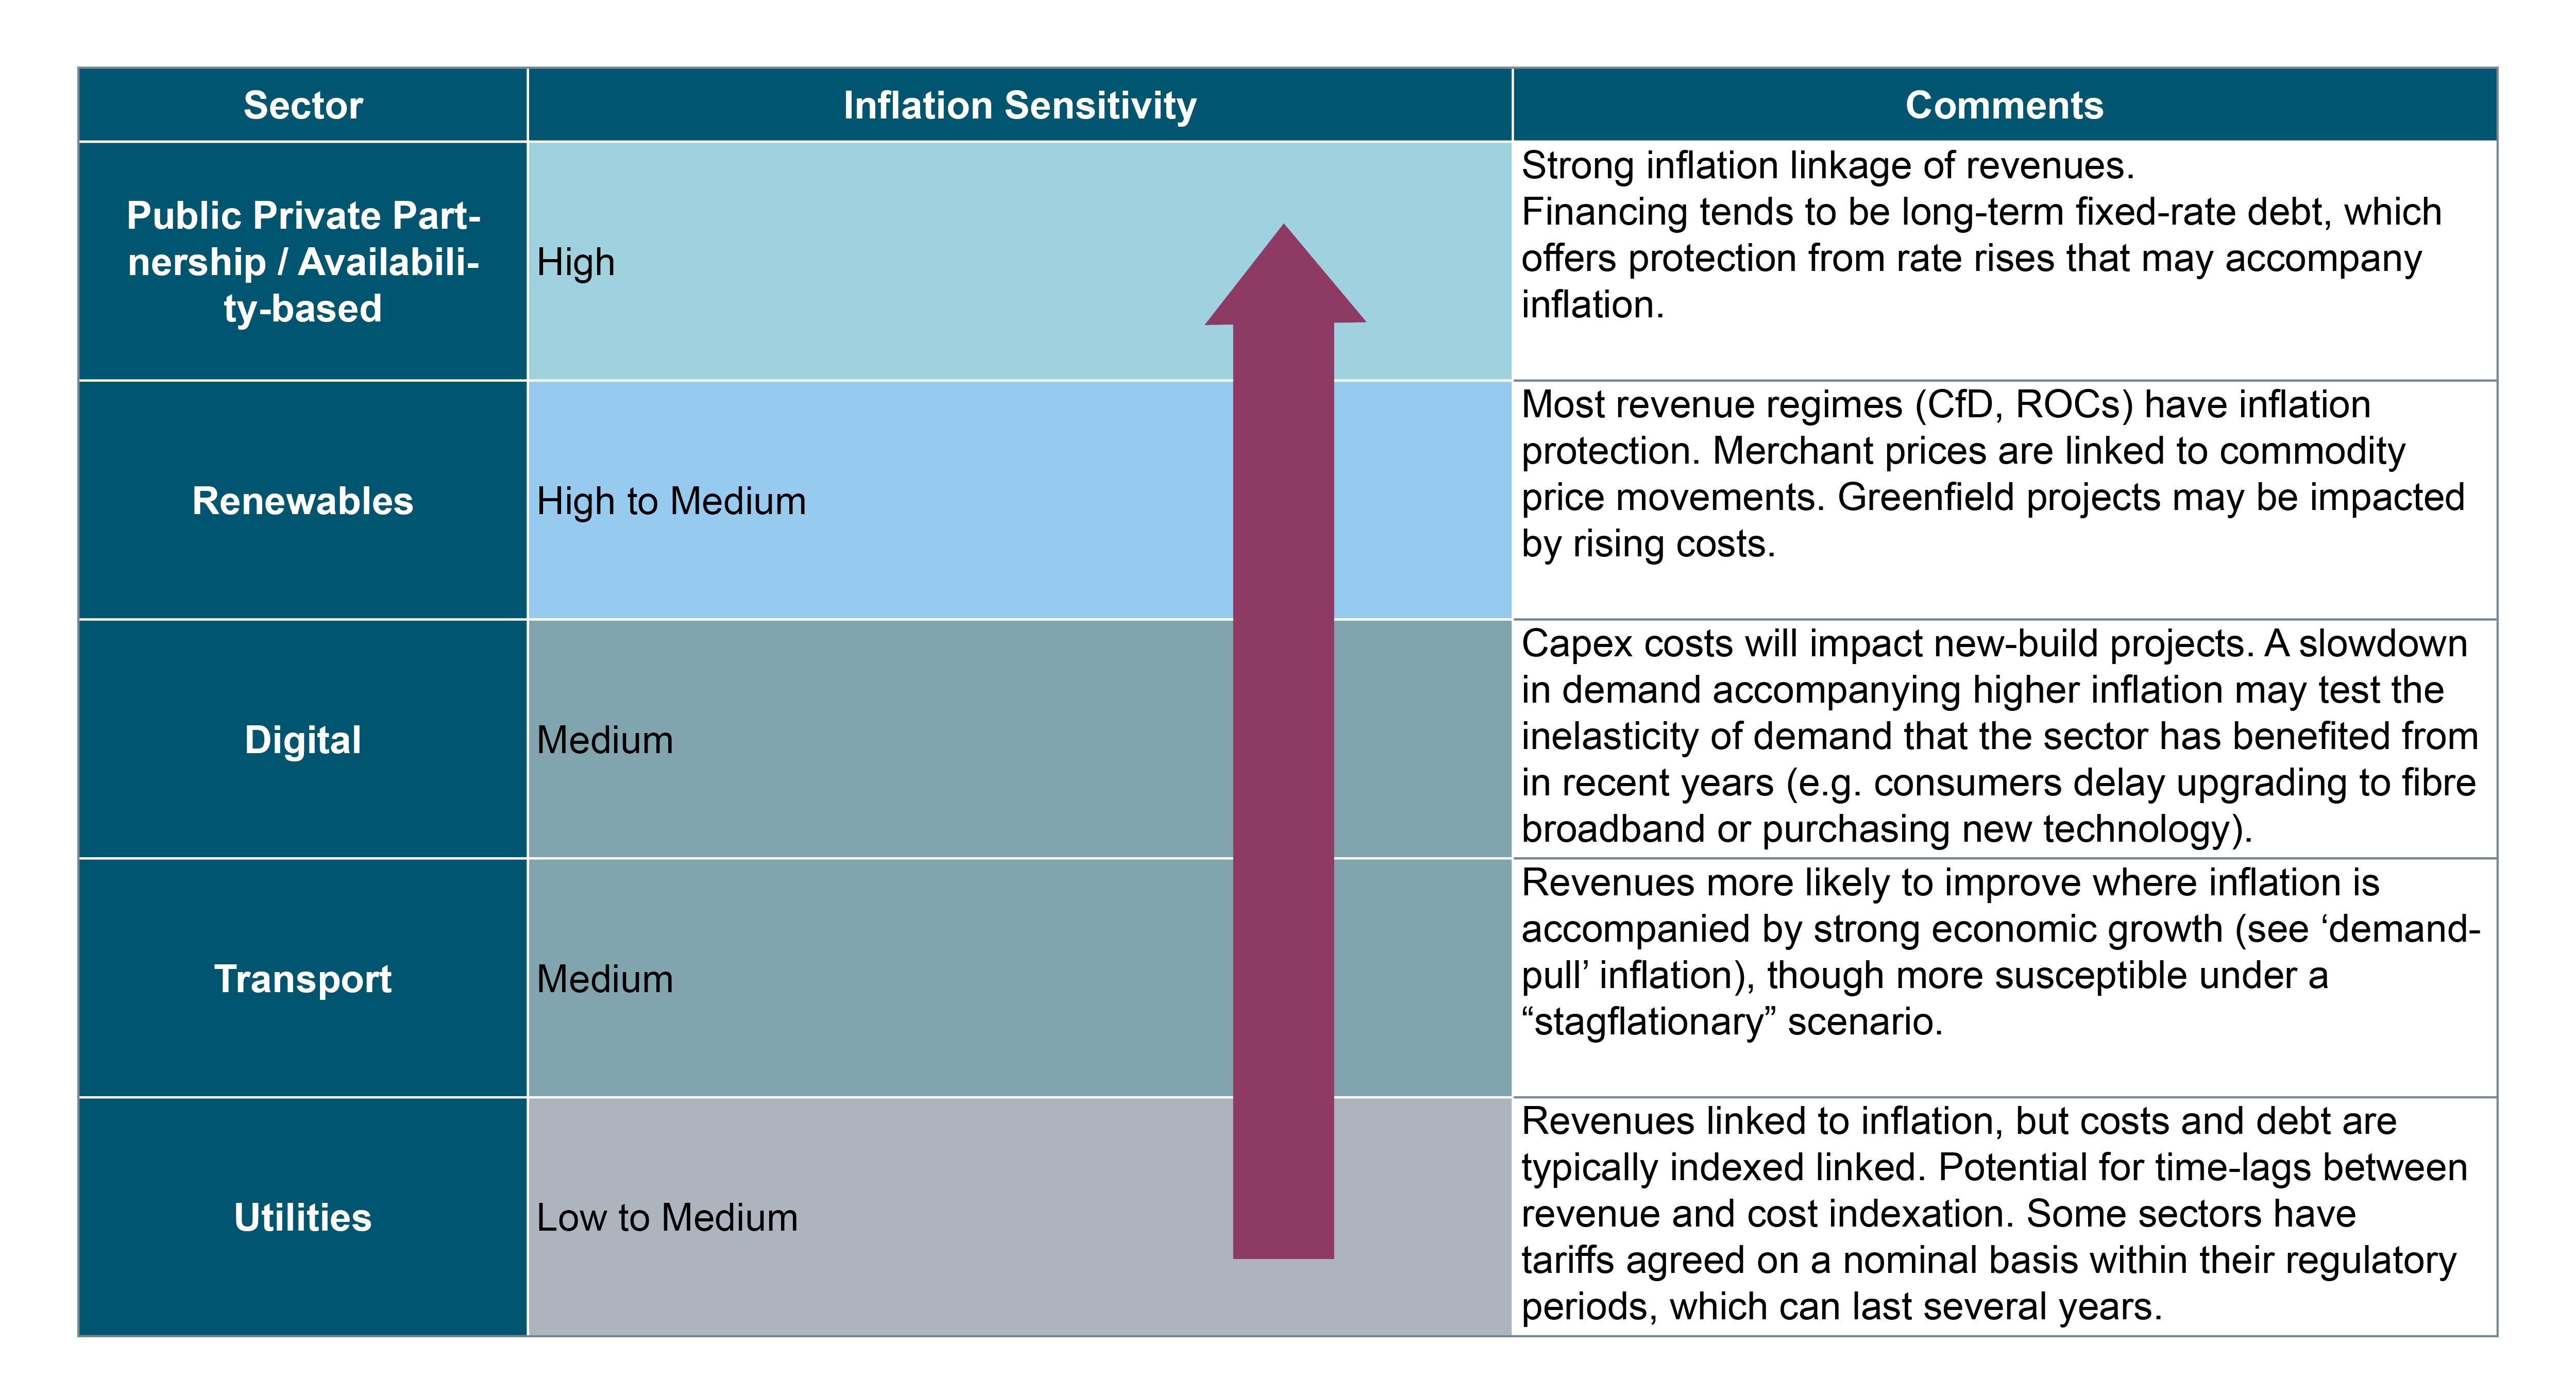 Figure 1: Infrastructure sectors ranked by typical inflation sensitivity